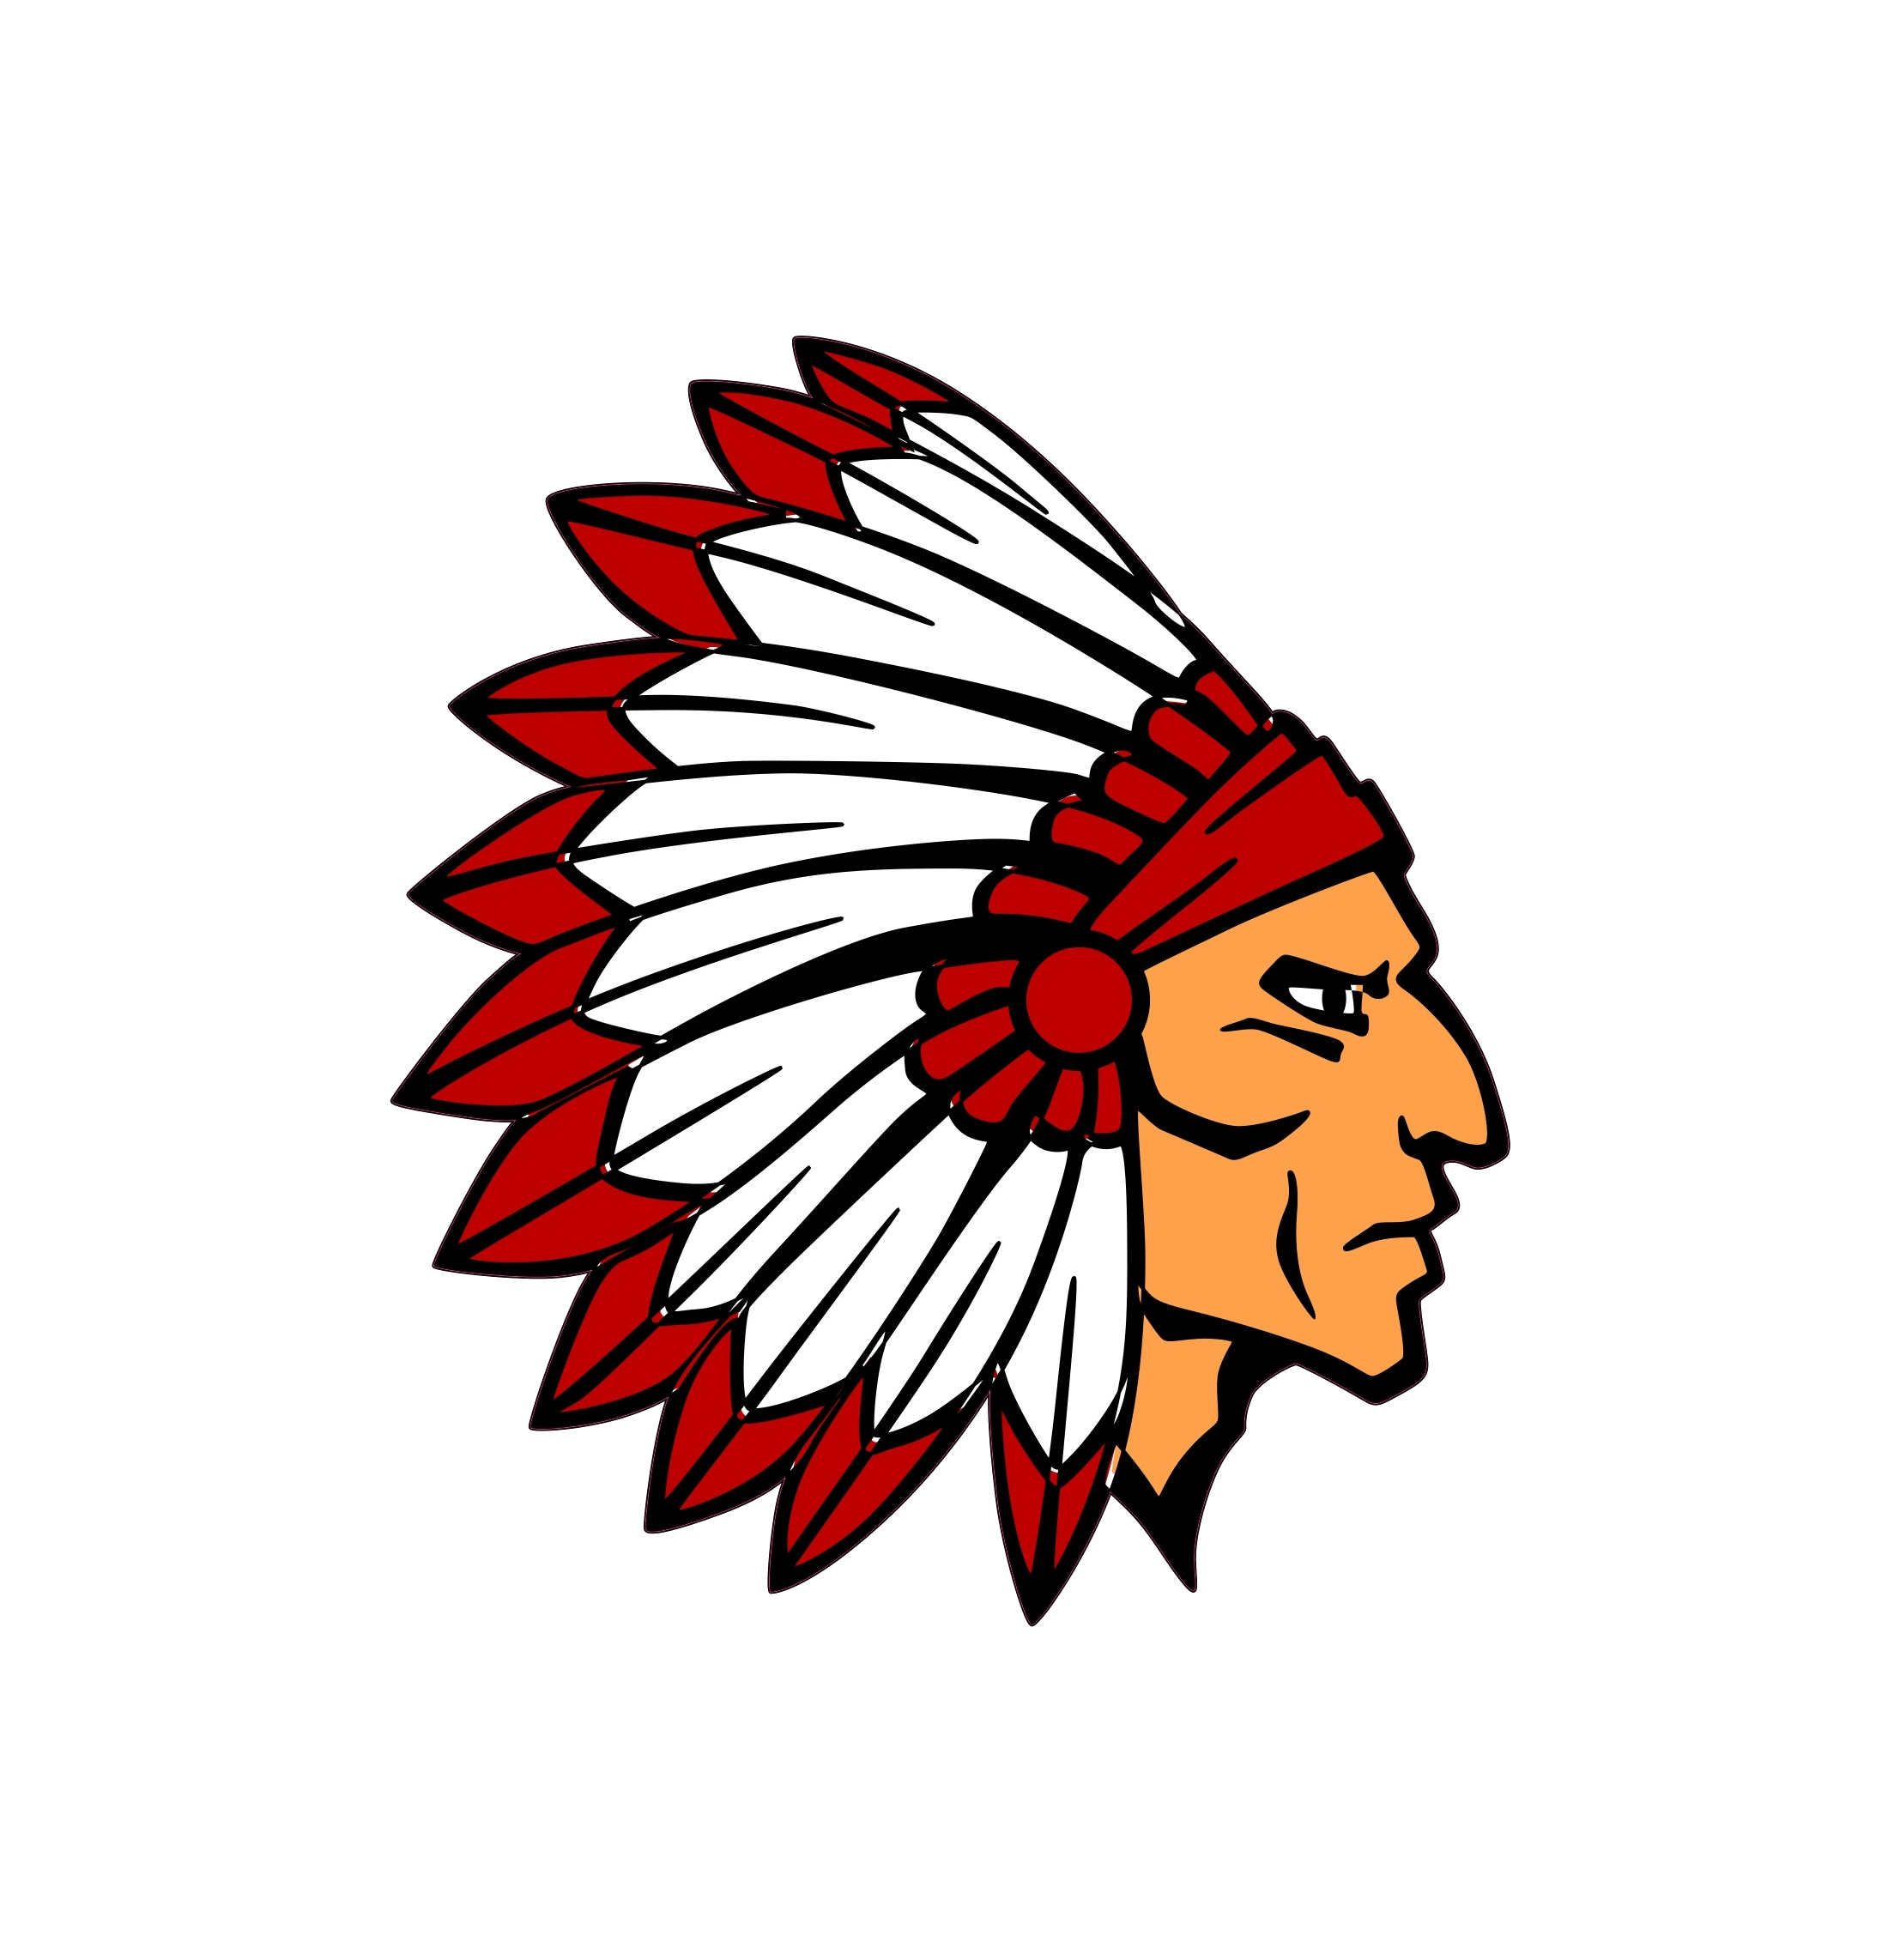 American Red Indian Logo - American indian PNG images free download, indians PNG